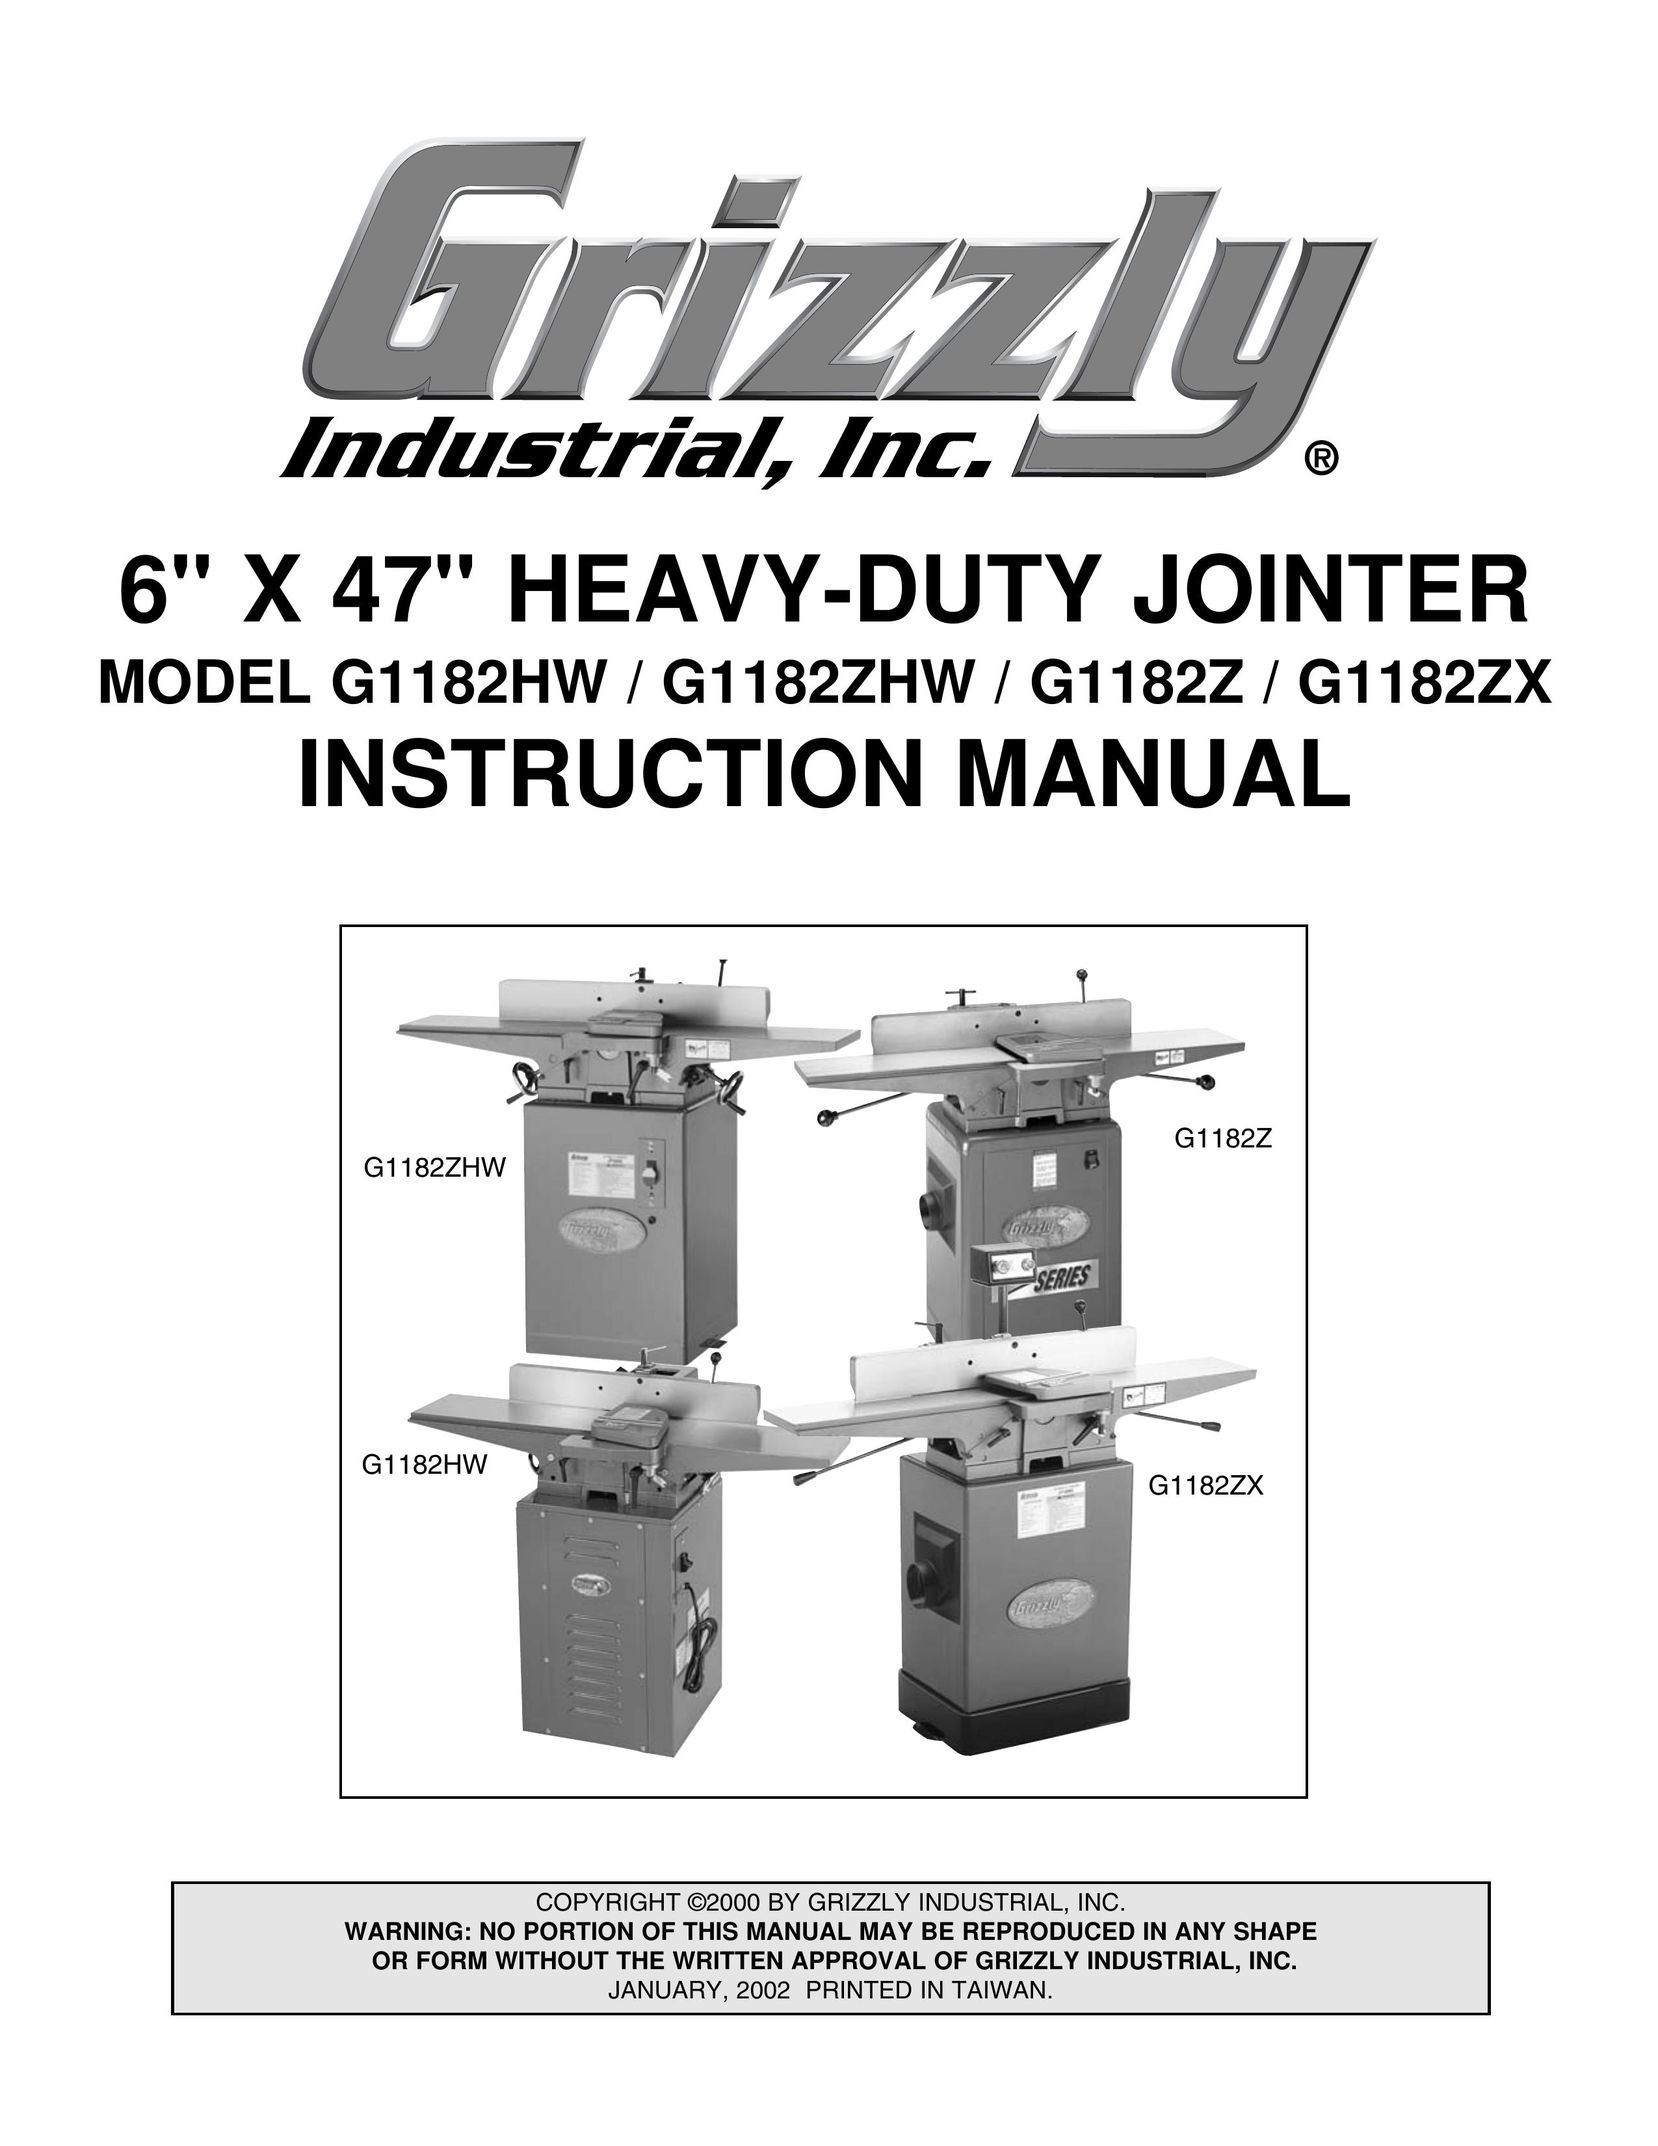 Grizzly G1182Z Biscuit Joiner User Manual